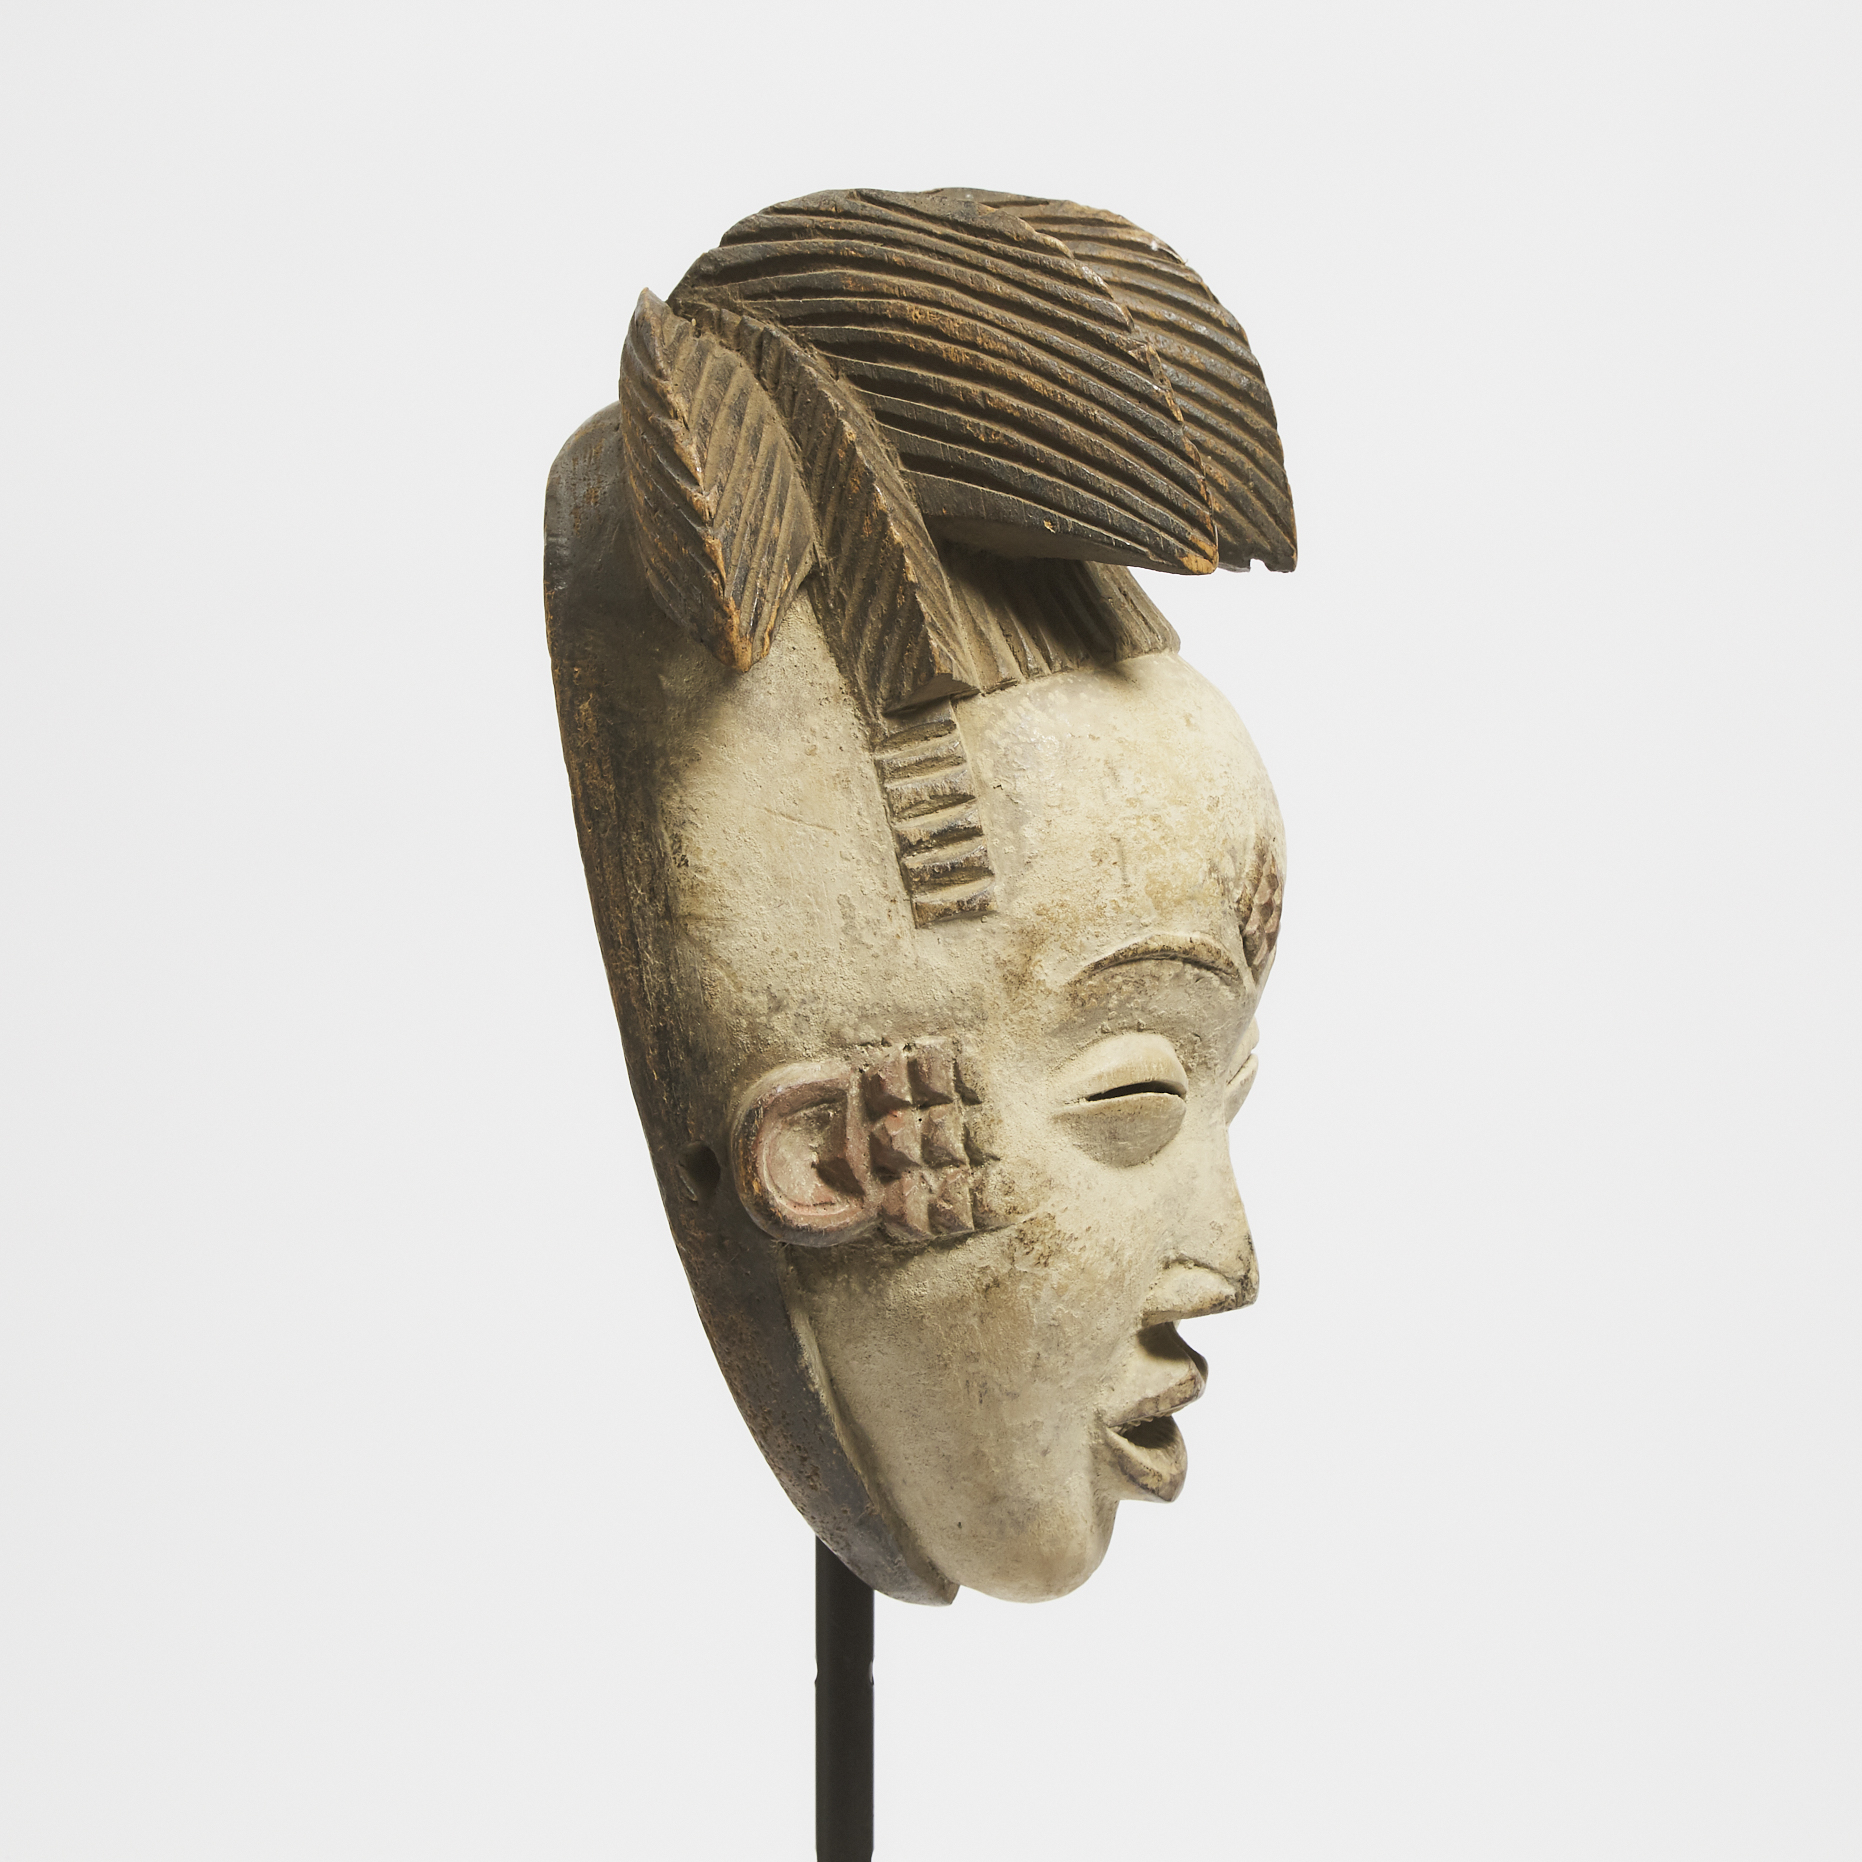 Puna Mask, Gabon, Central Africa, late 20th century